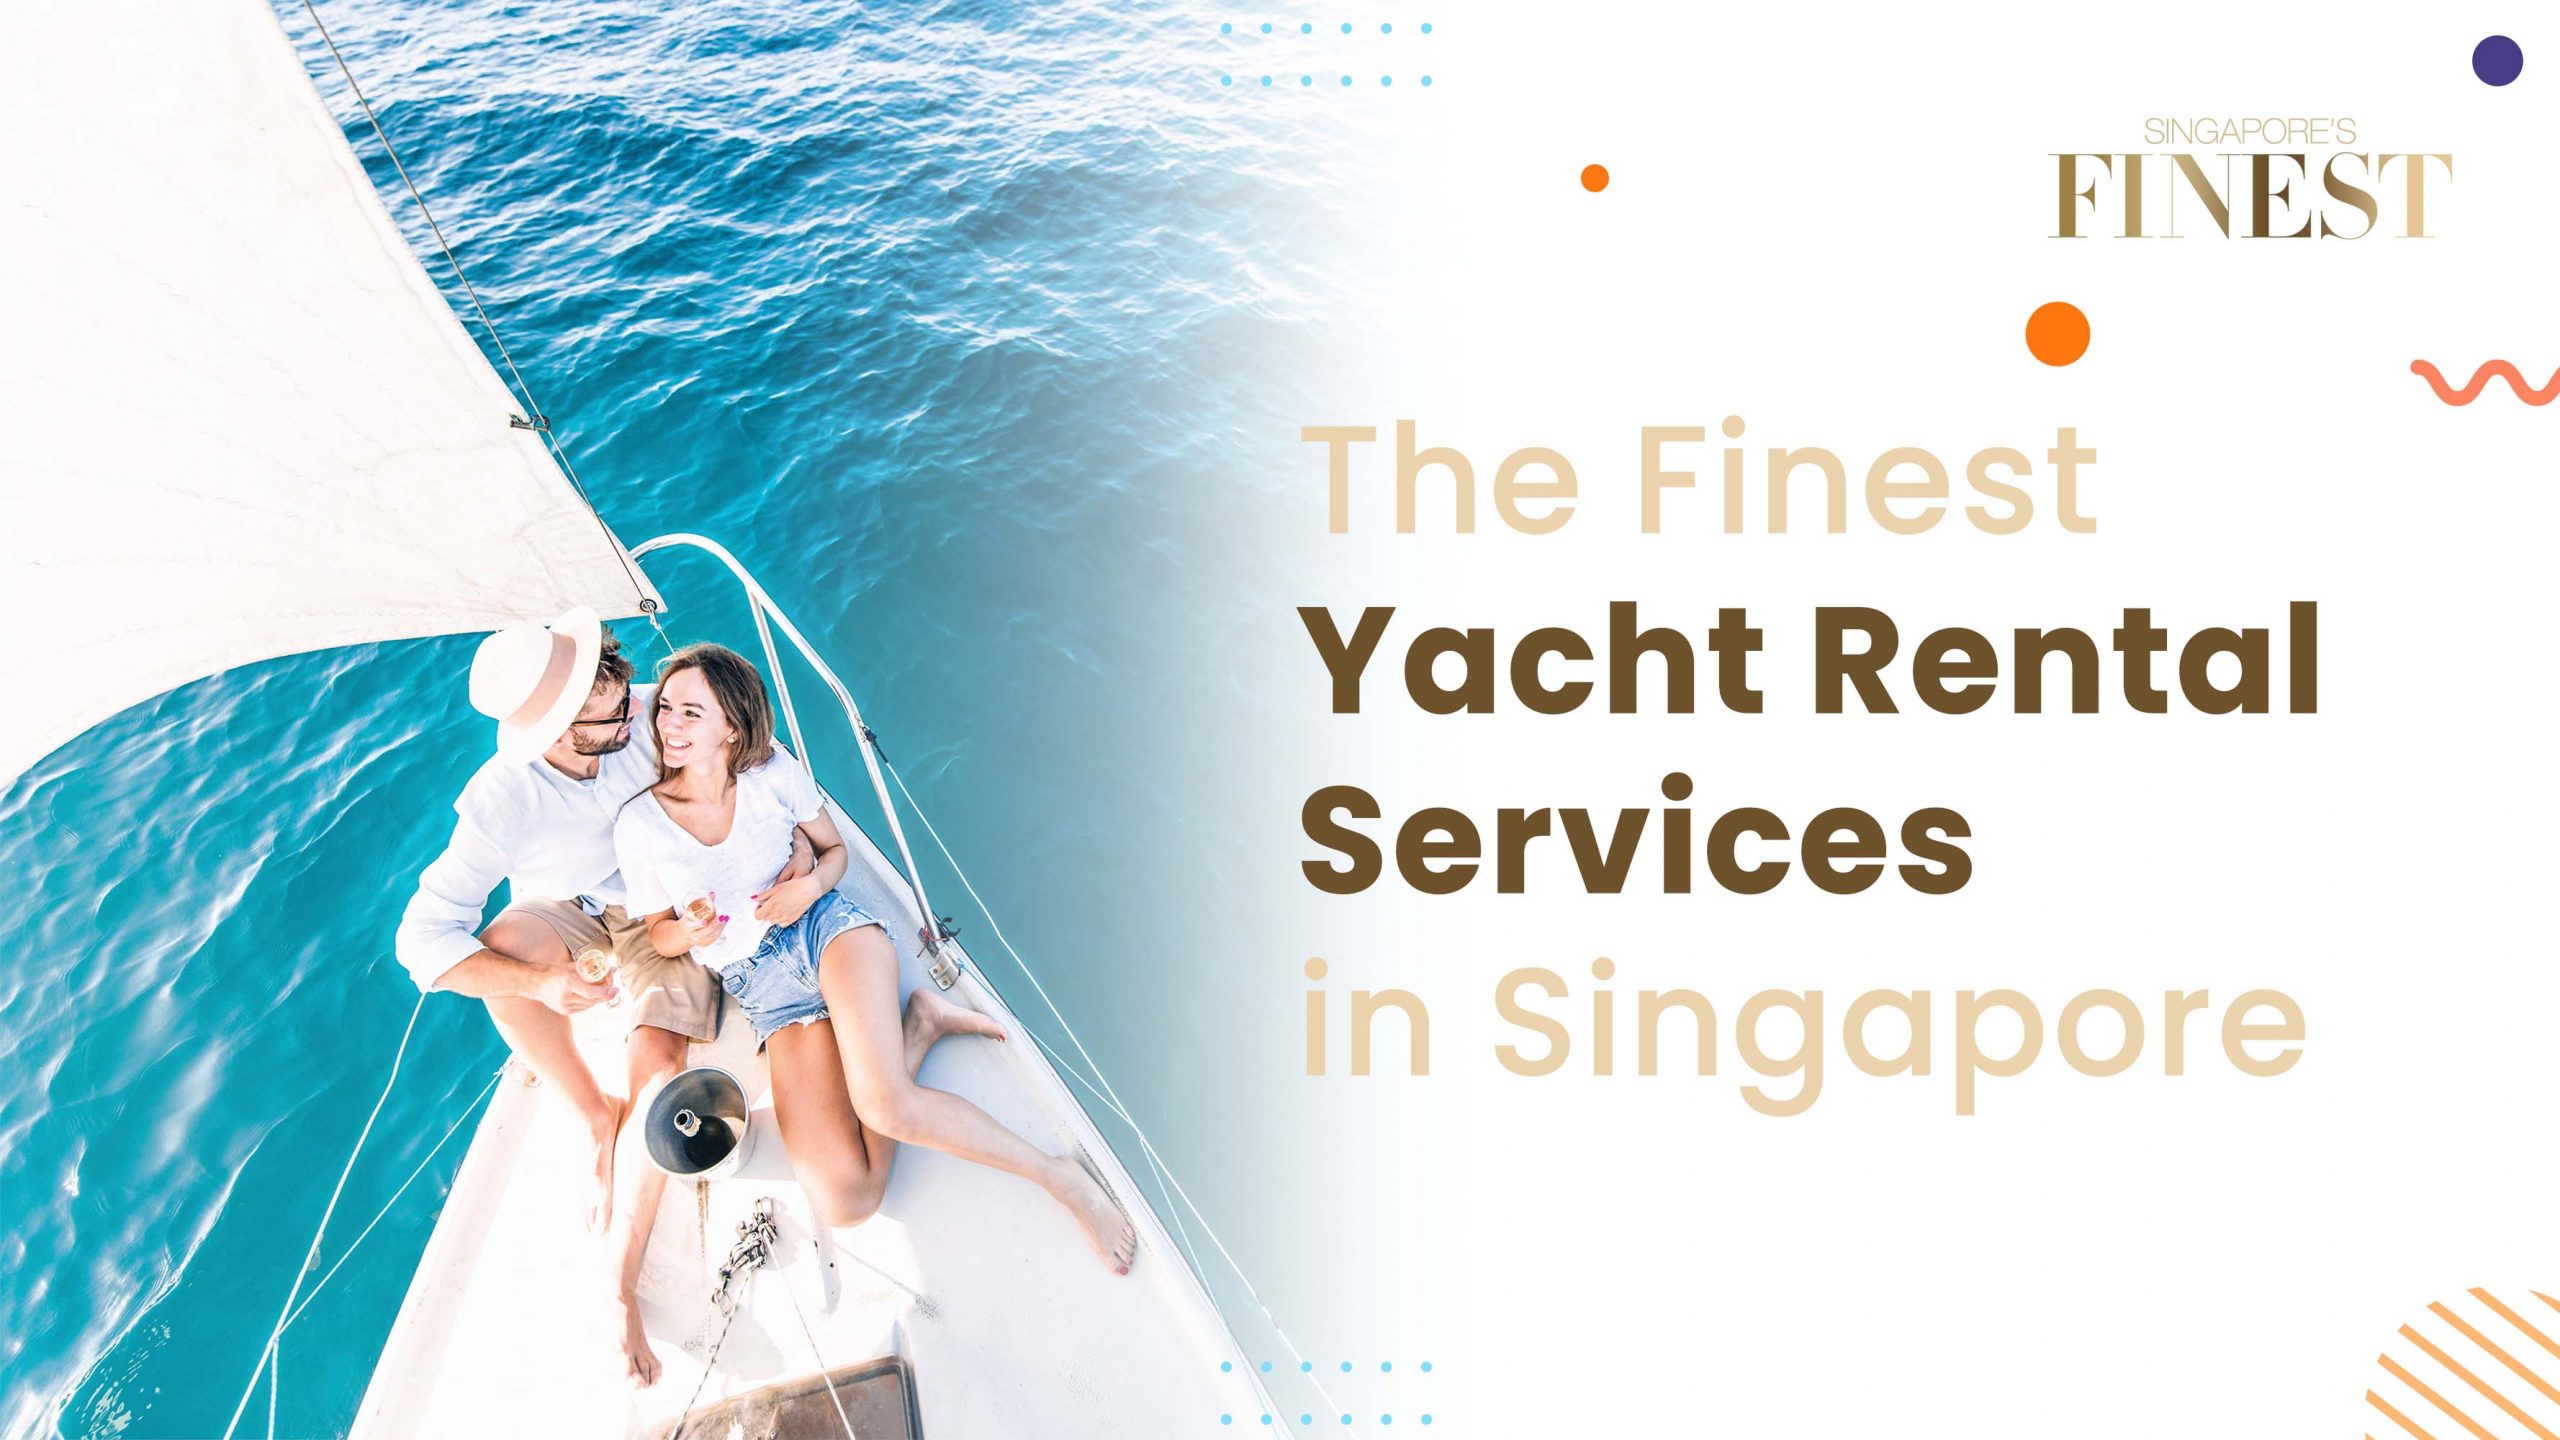 The Finest Yacht Rental Services in Singapore